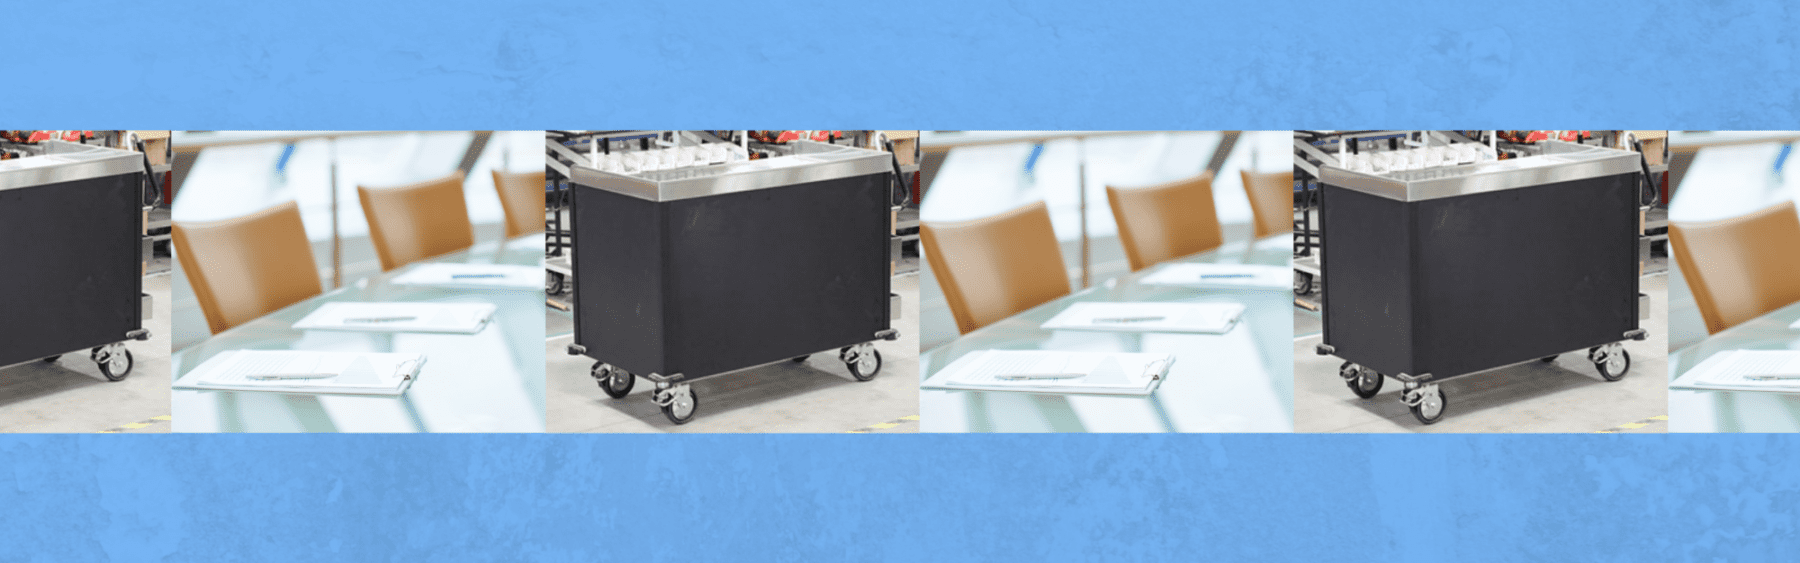 custom catering cart for conference center